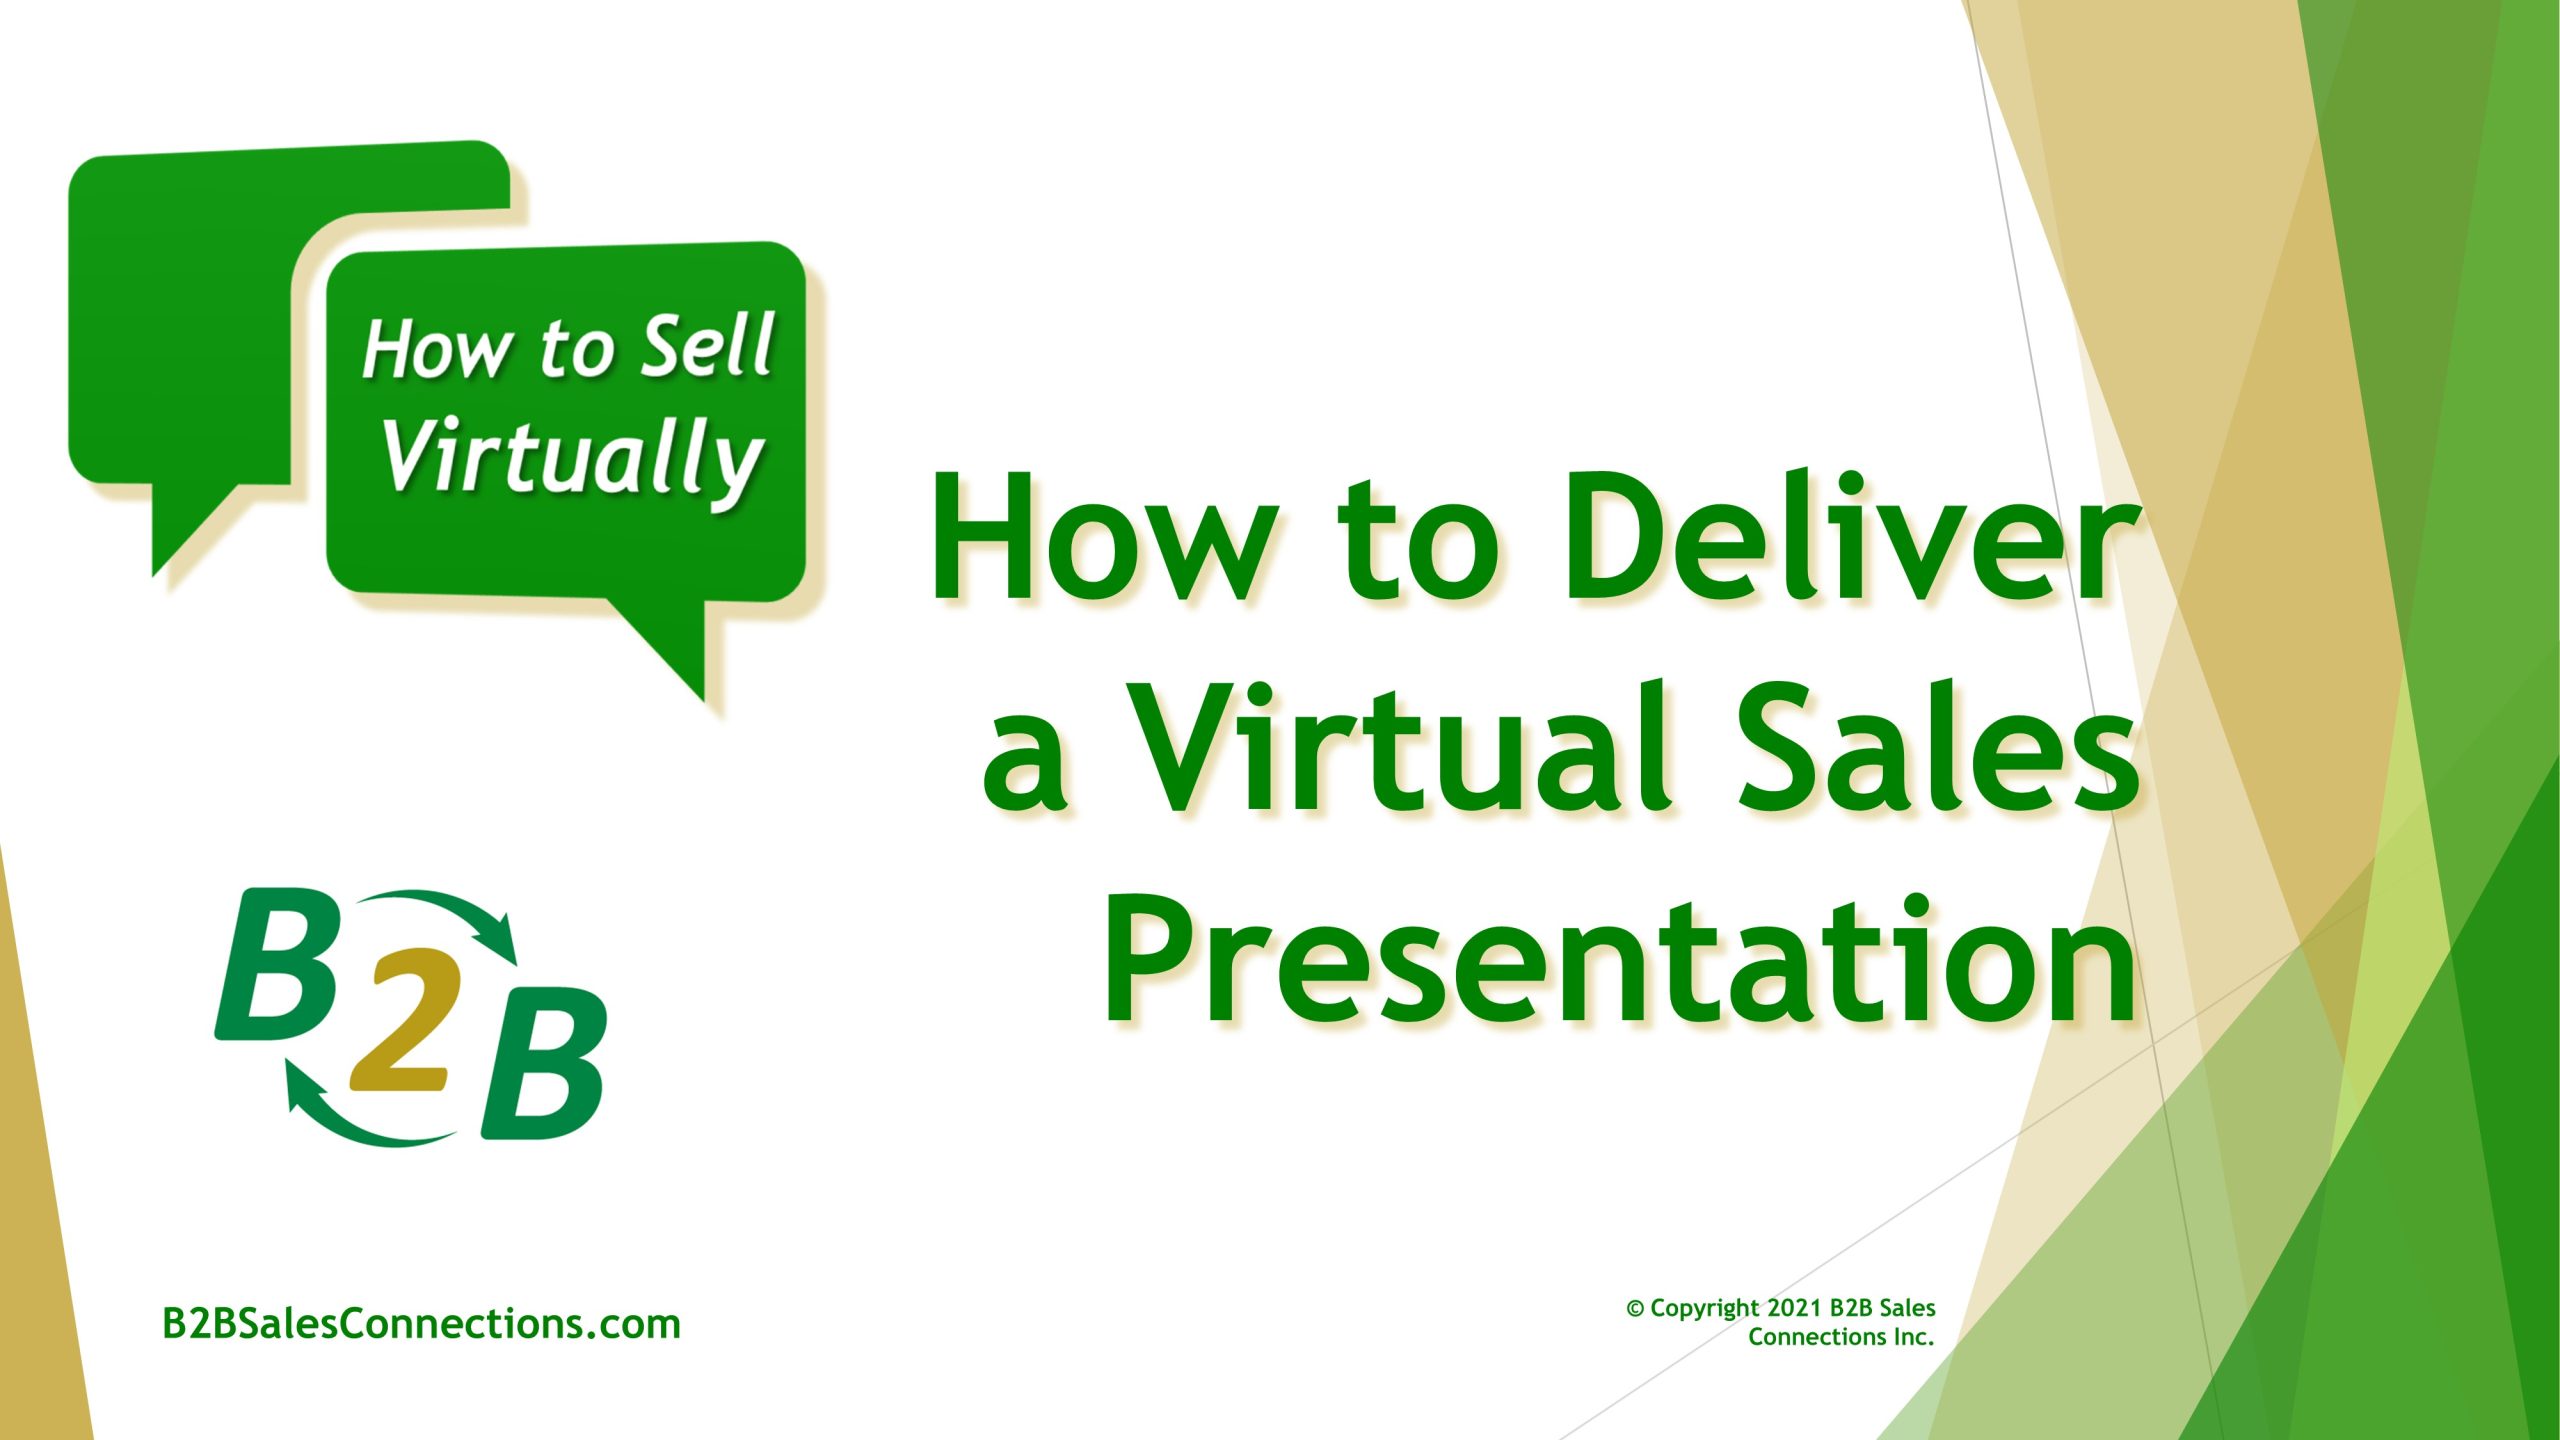 How to Deliver a Virtual Sales Presentation